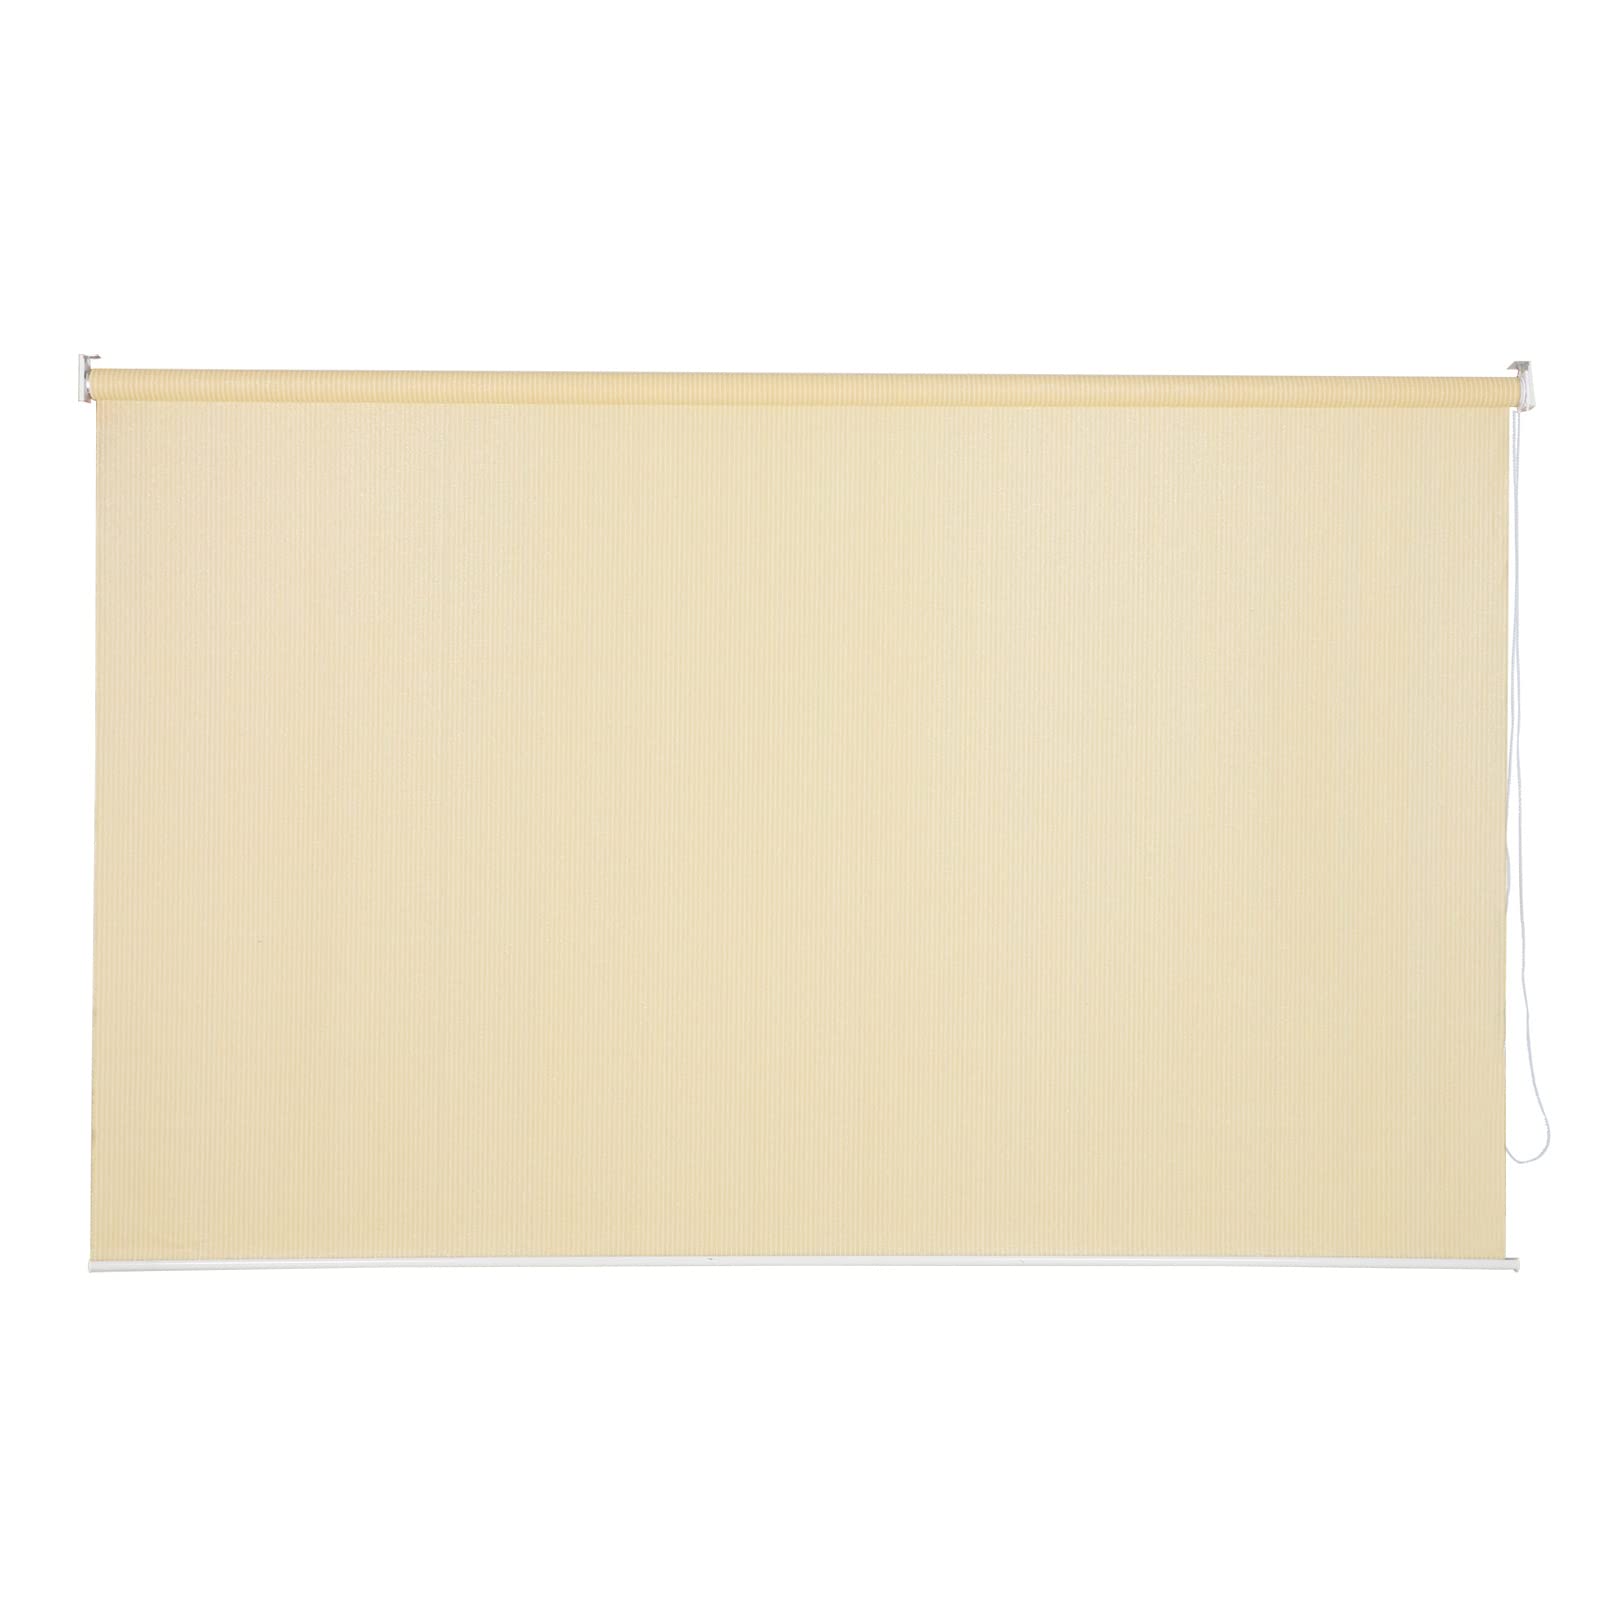 PHI VILLA Outdoor Roller Shade 8' (W) x 8' (H), Patio Shades Roll Up, Wheat